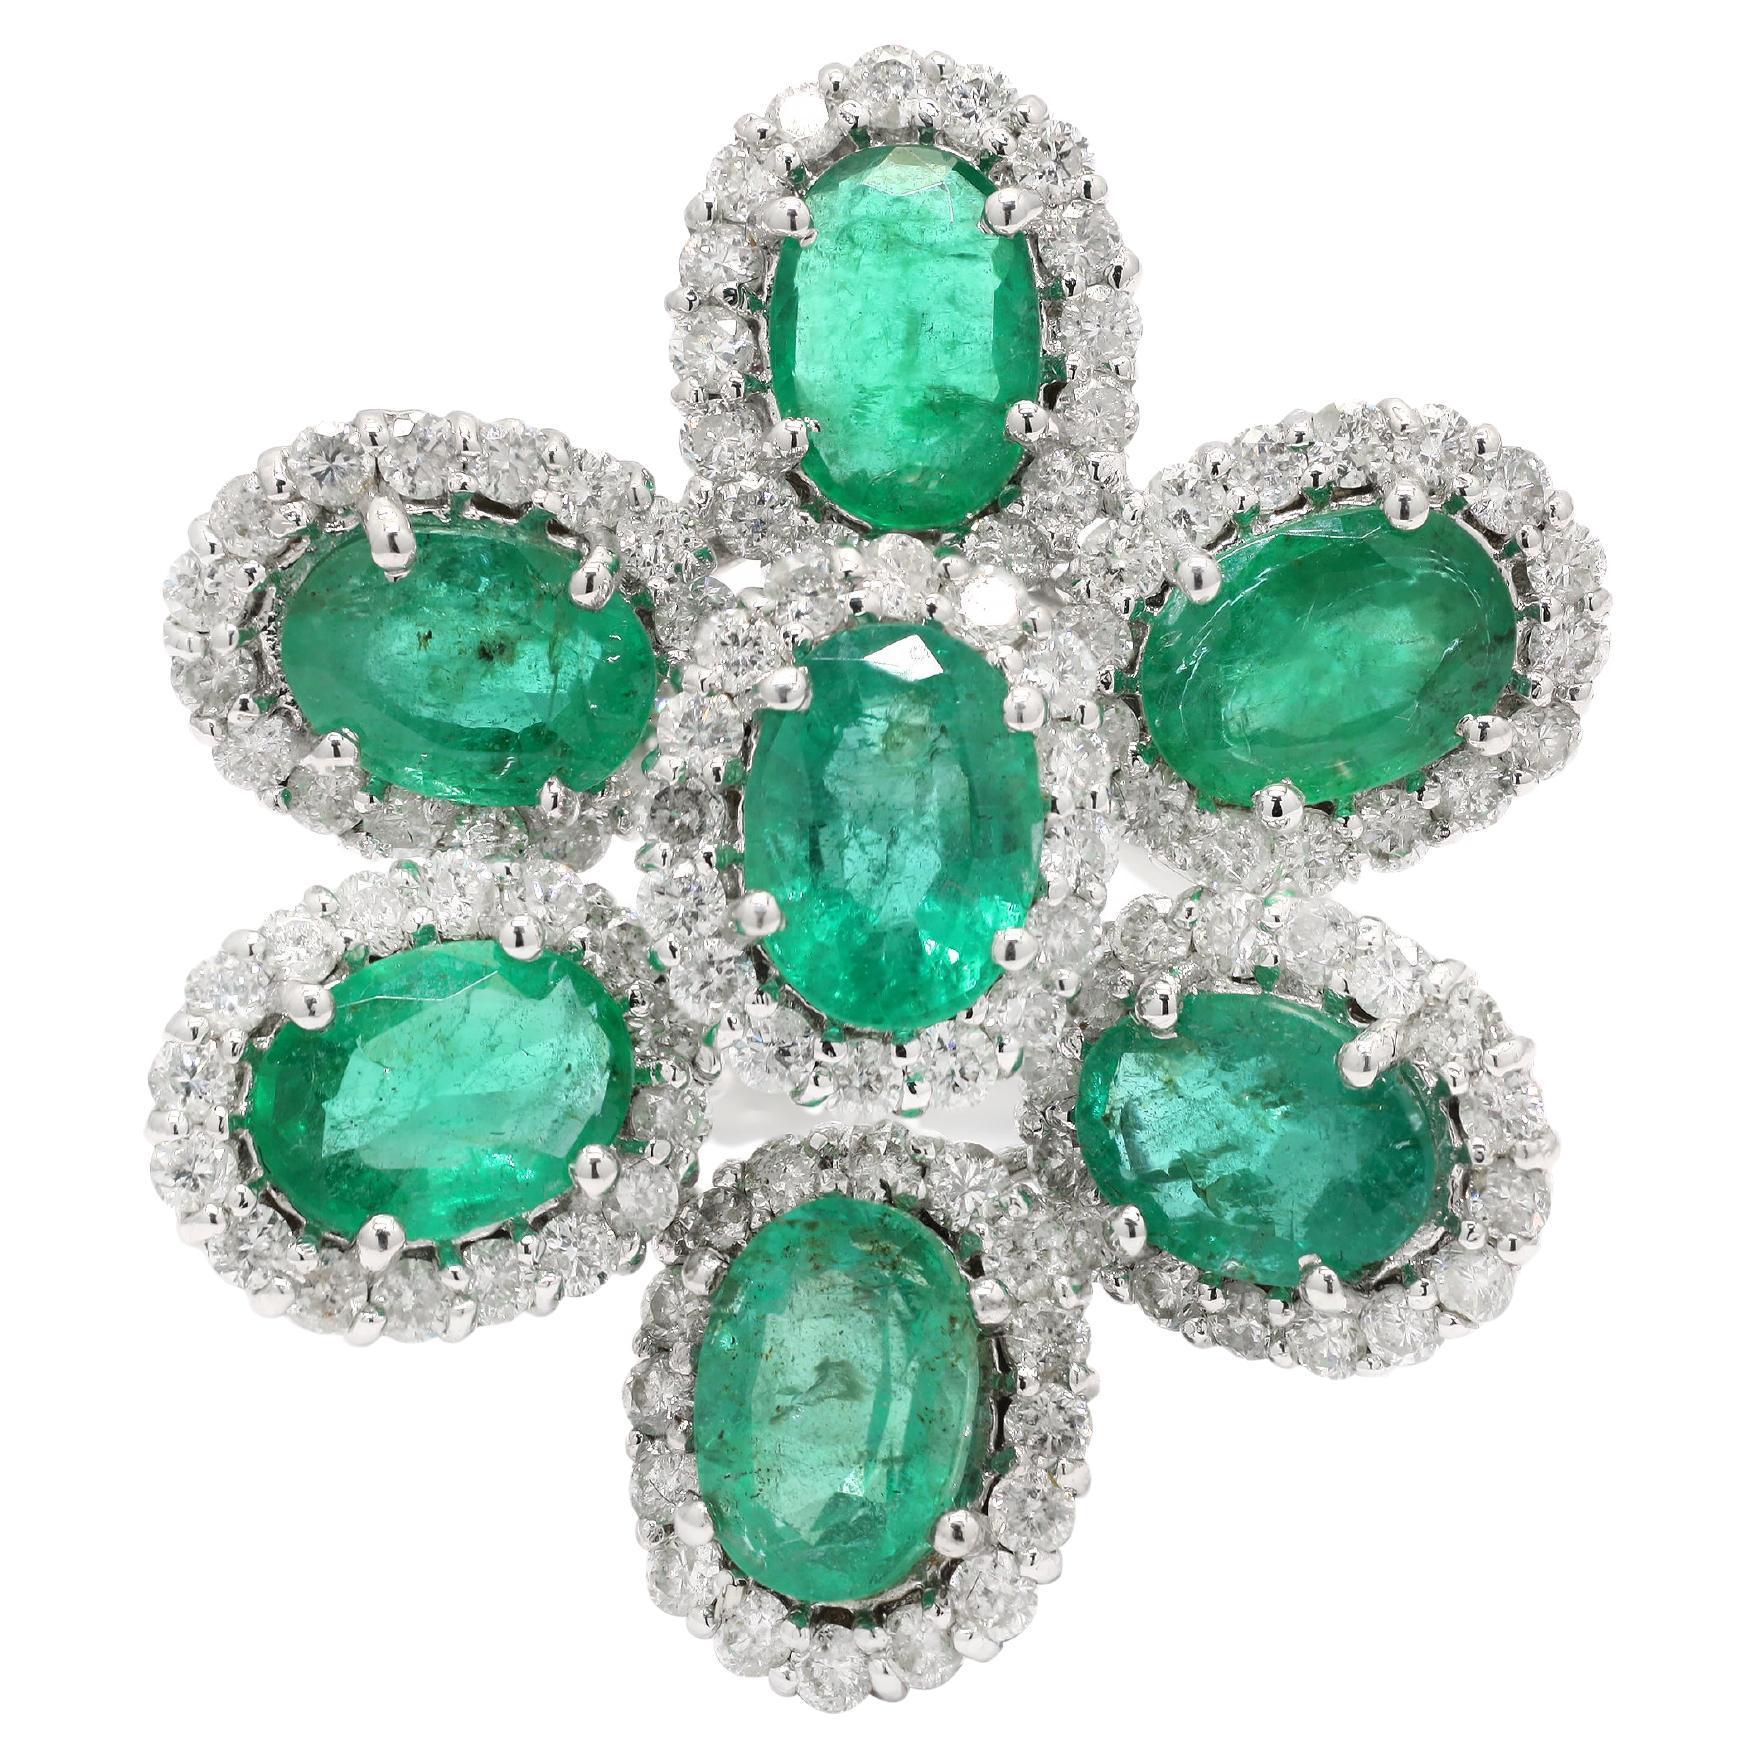 For Sale:  Statement 5 ct Emerald Flower Ring with Halo Diamonds in 14 Karat White Gold